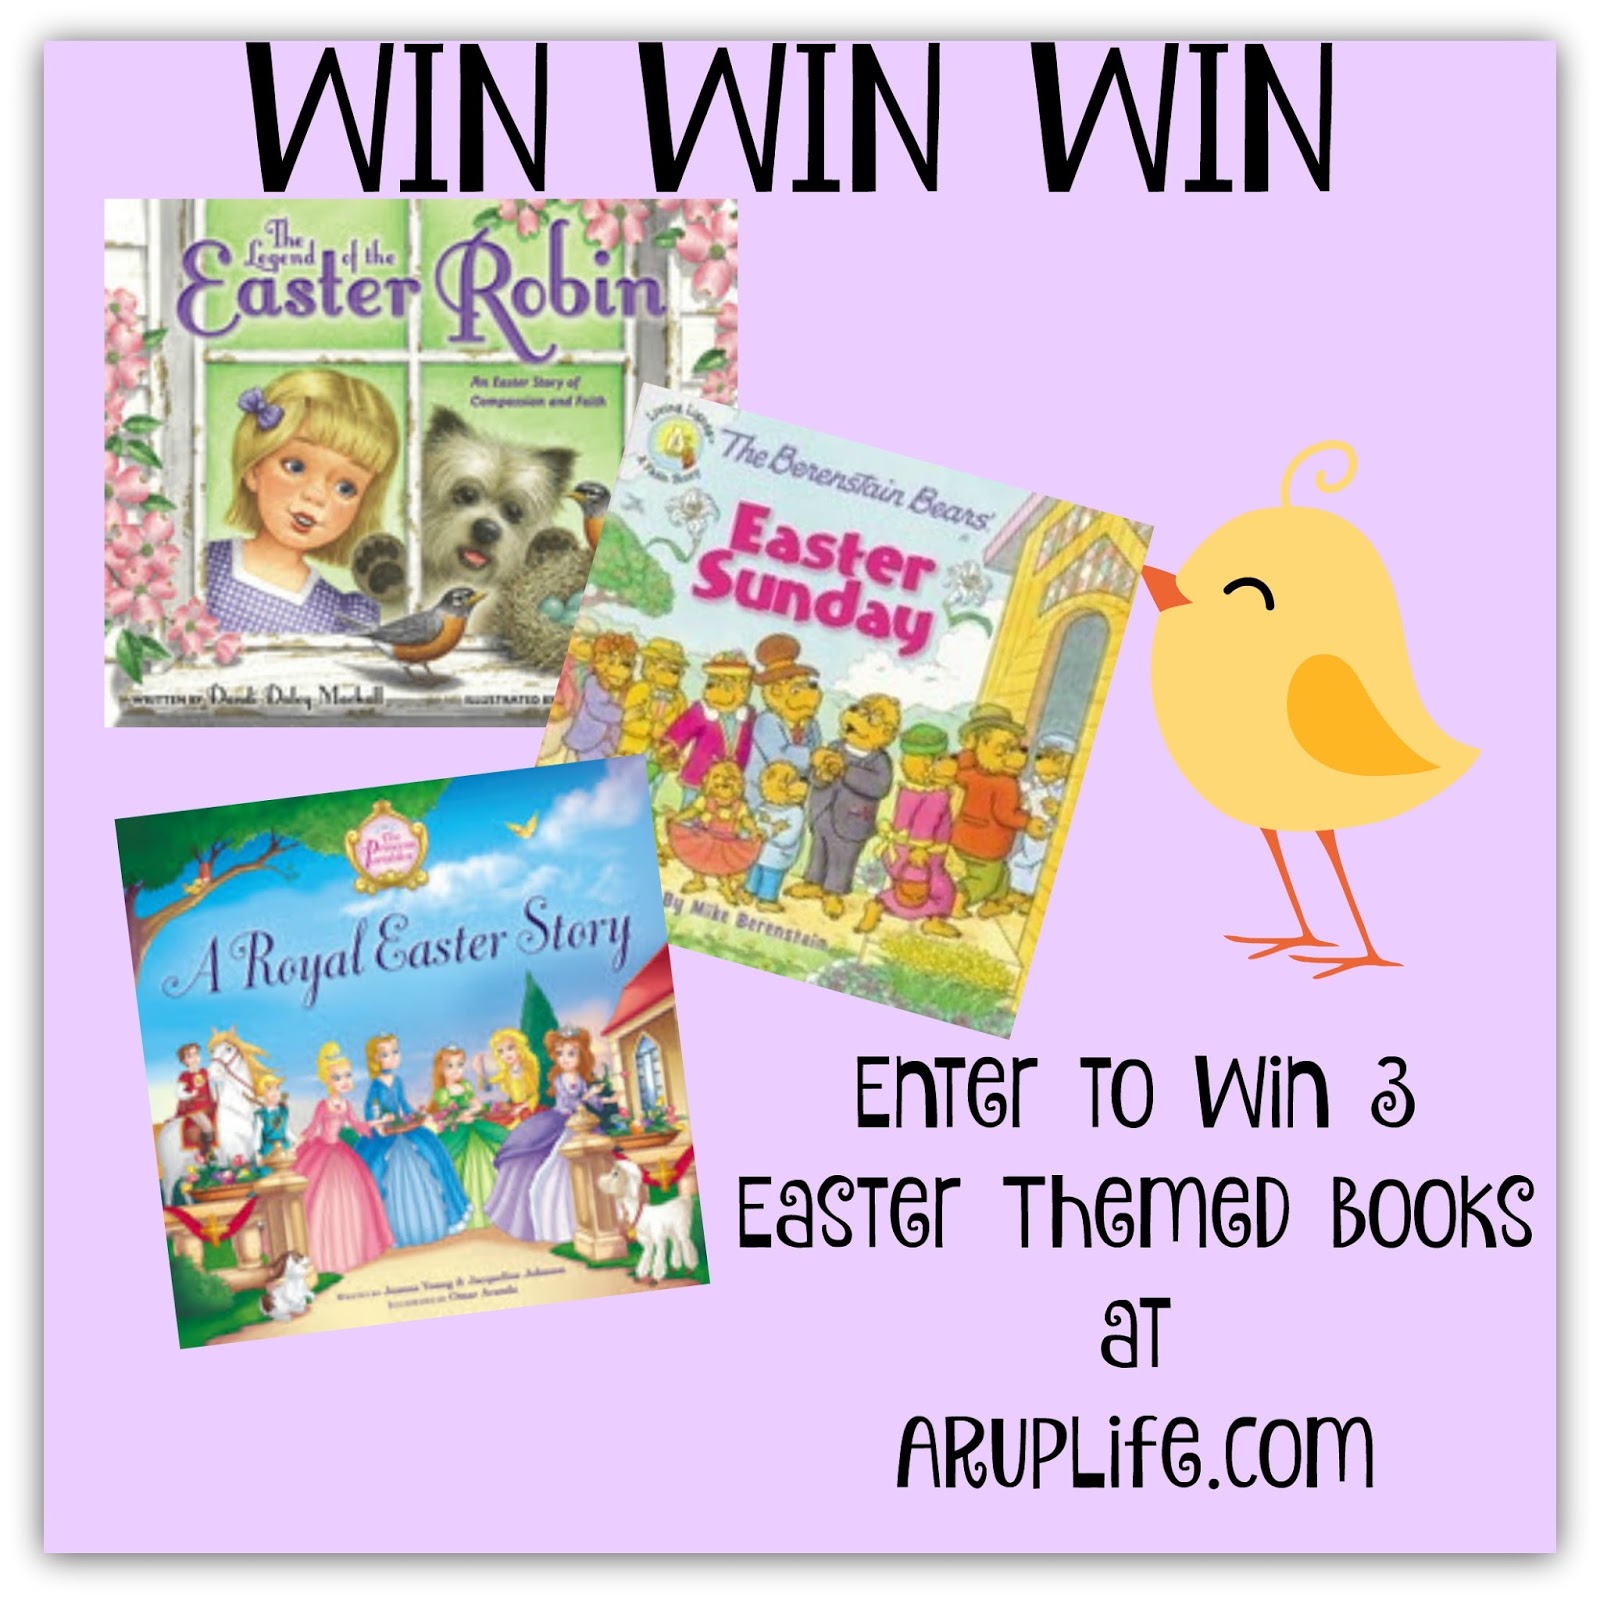 a-rup-life-enter-to-win-3-easter-themed-books-from-zonderkidz